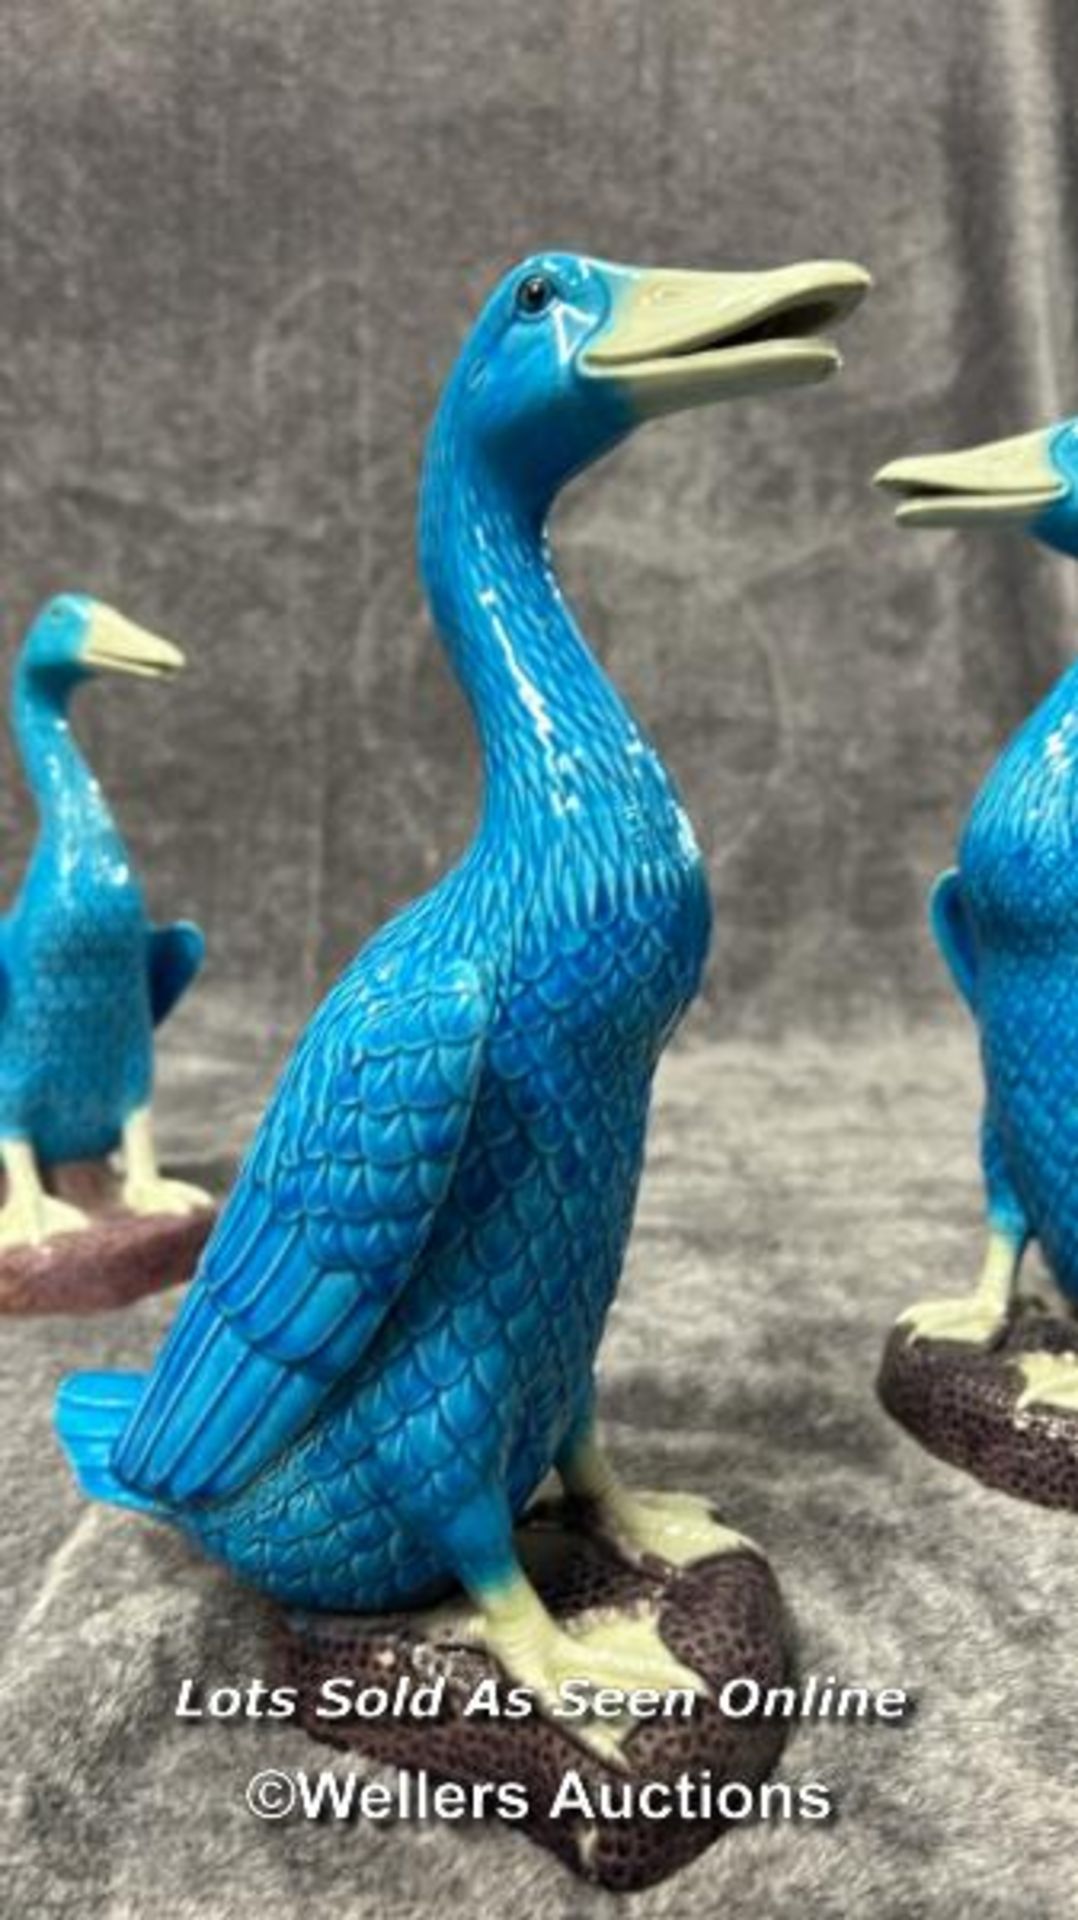 Set of six Chinese turquoise glazed porcelain duck figures, the tallest 29cm high / AN6 - Image 9 of 17